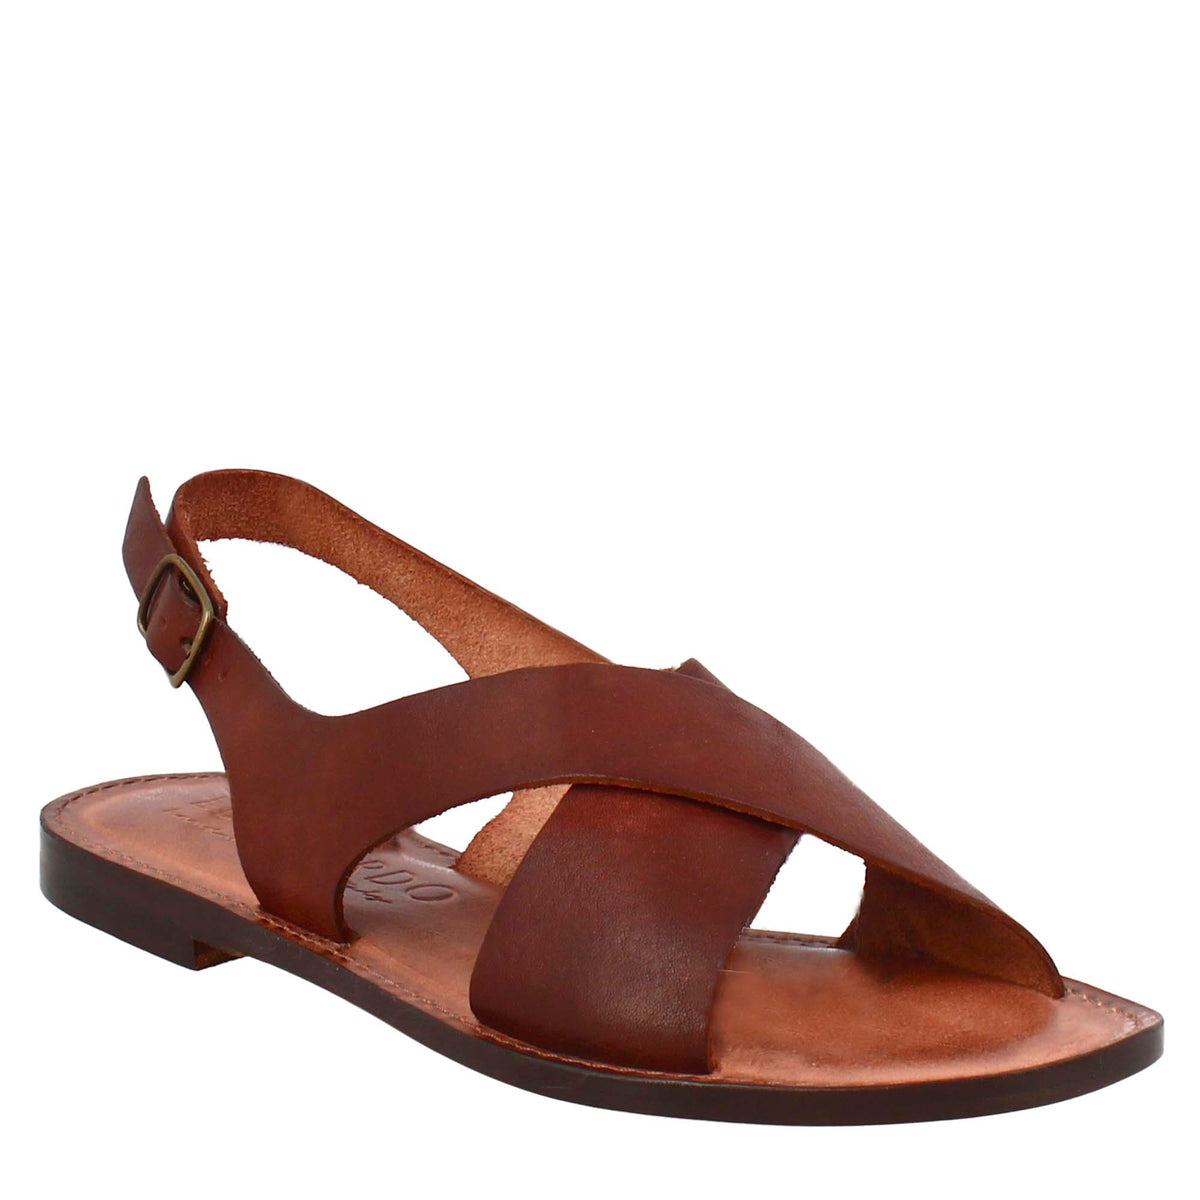 Ancient Roman style women's Arcadia sandals in brown leather 